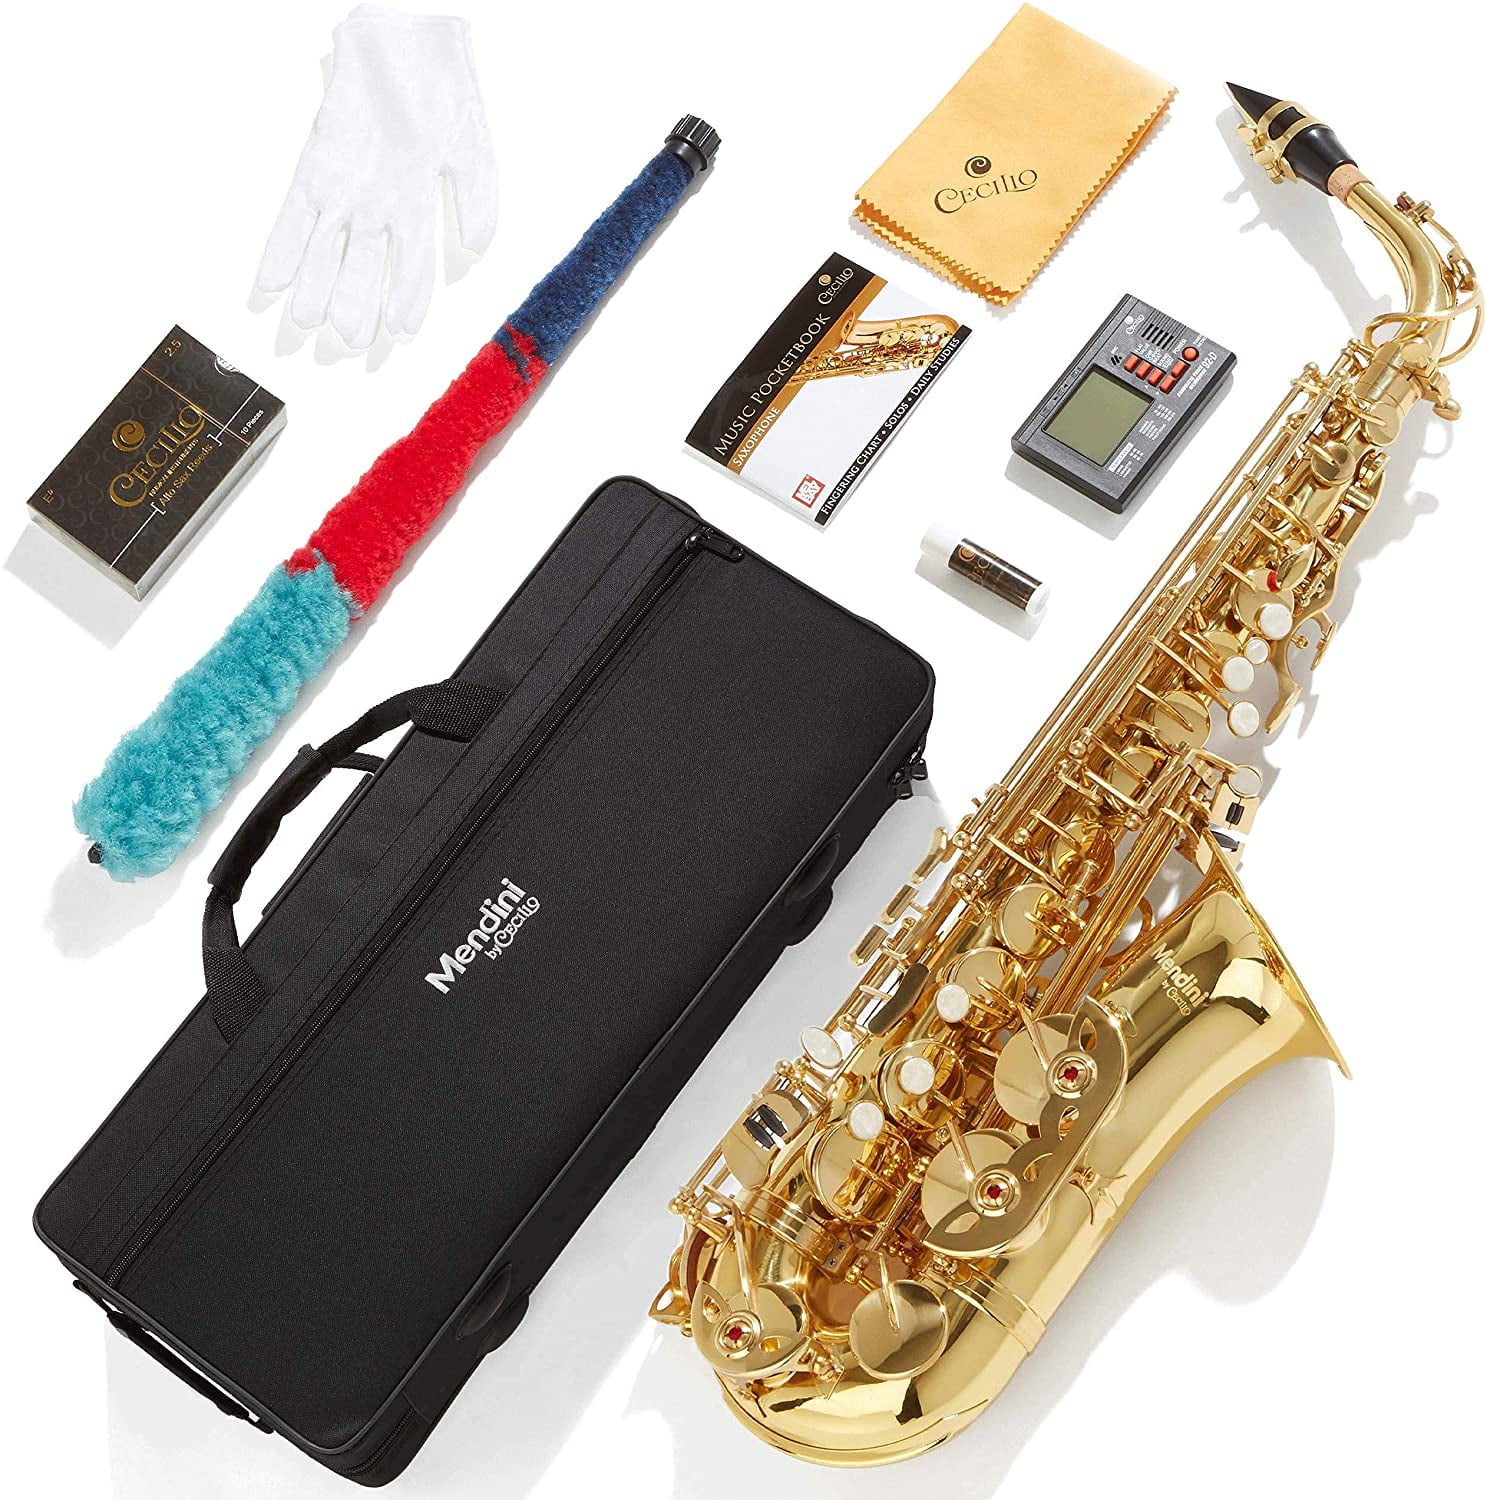 Mendini By Cecilio Eb Alto Saxophone - Case, Tuner, Mouthpiece, 10 Reeds, Pocketbook- MAS-BK r E Flat Musical Instruments - image 1 of 8